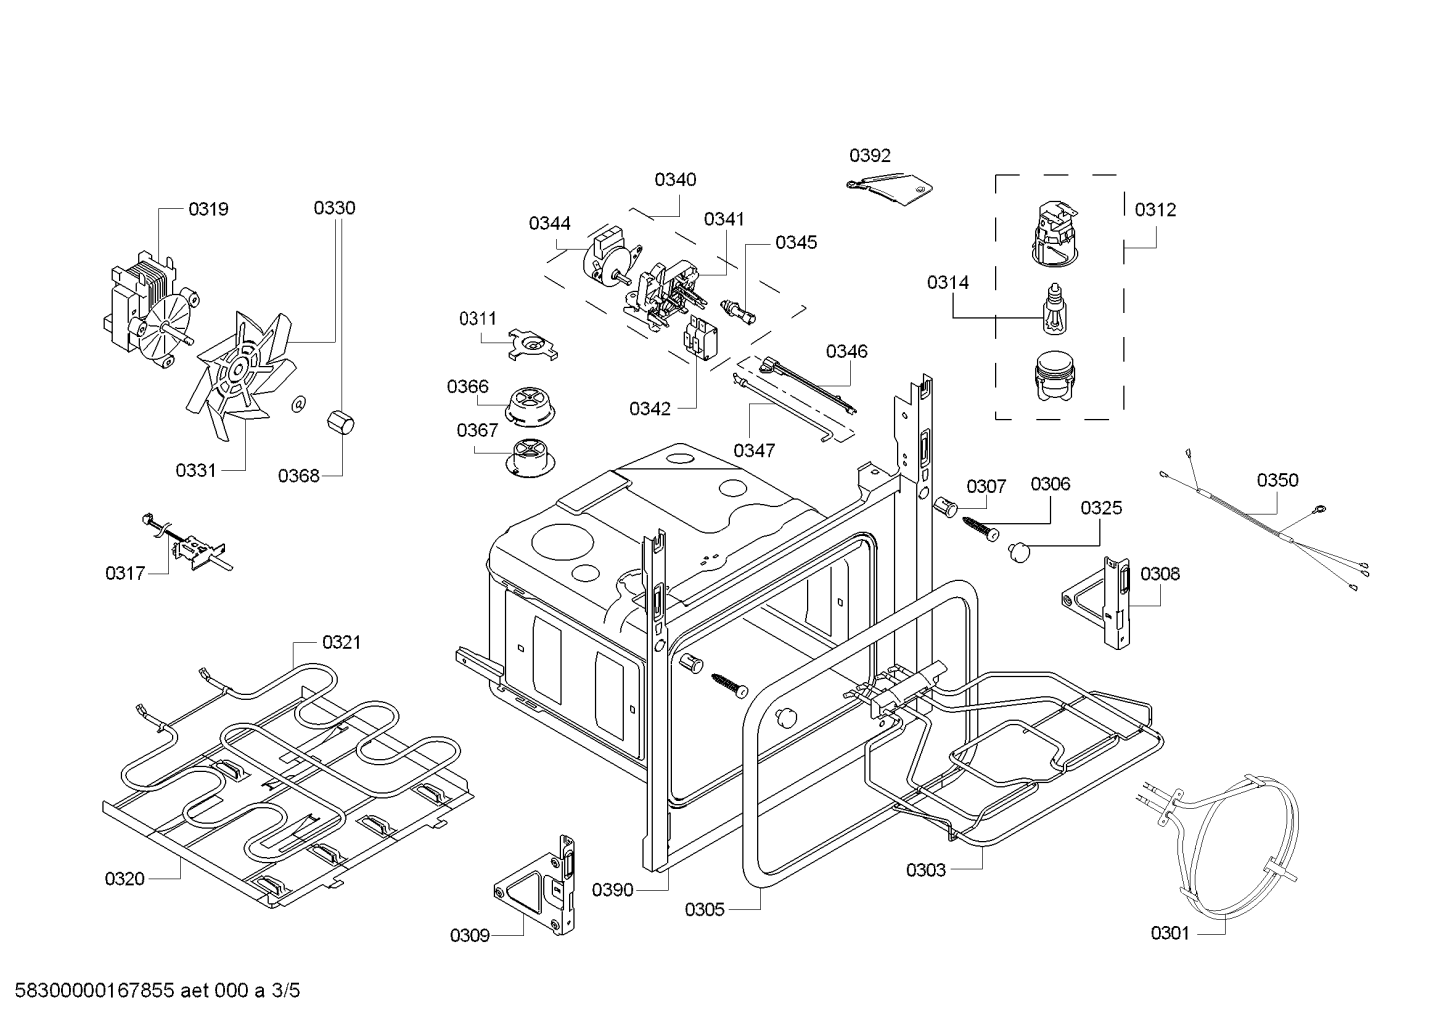 drawing_link_3_device_1826648